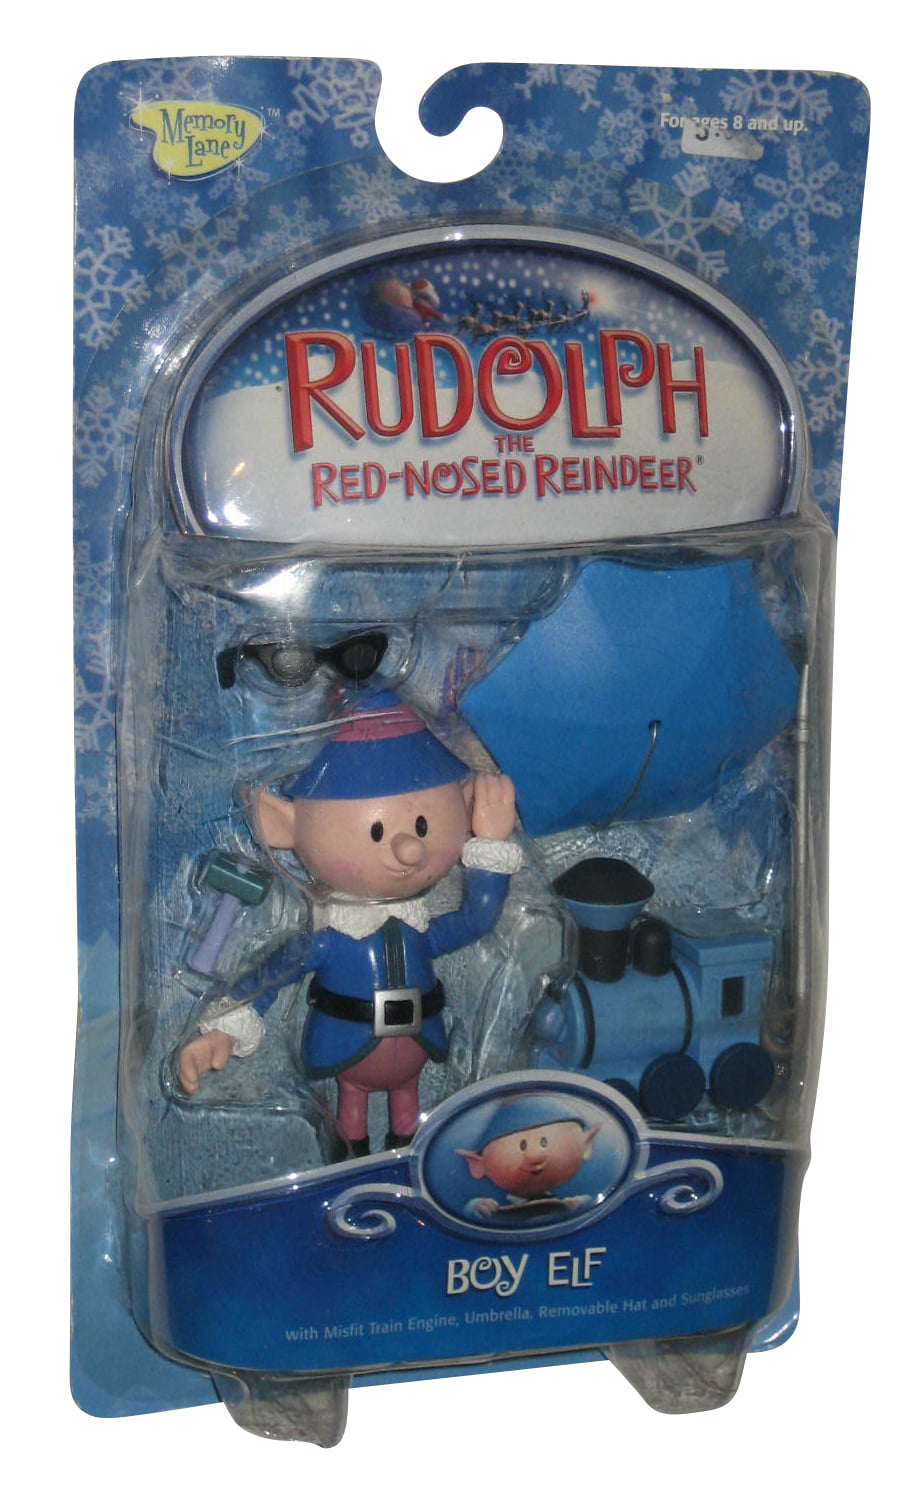 12 RUDOLPH THE ISLAND OF MISFIT TOYS FIGURINE COLLECTION PVC FIGURES TOY TRAIN 